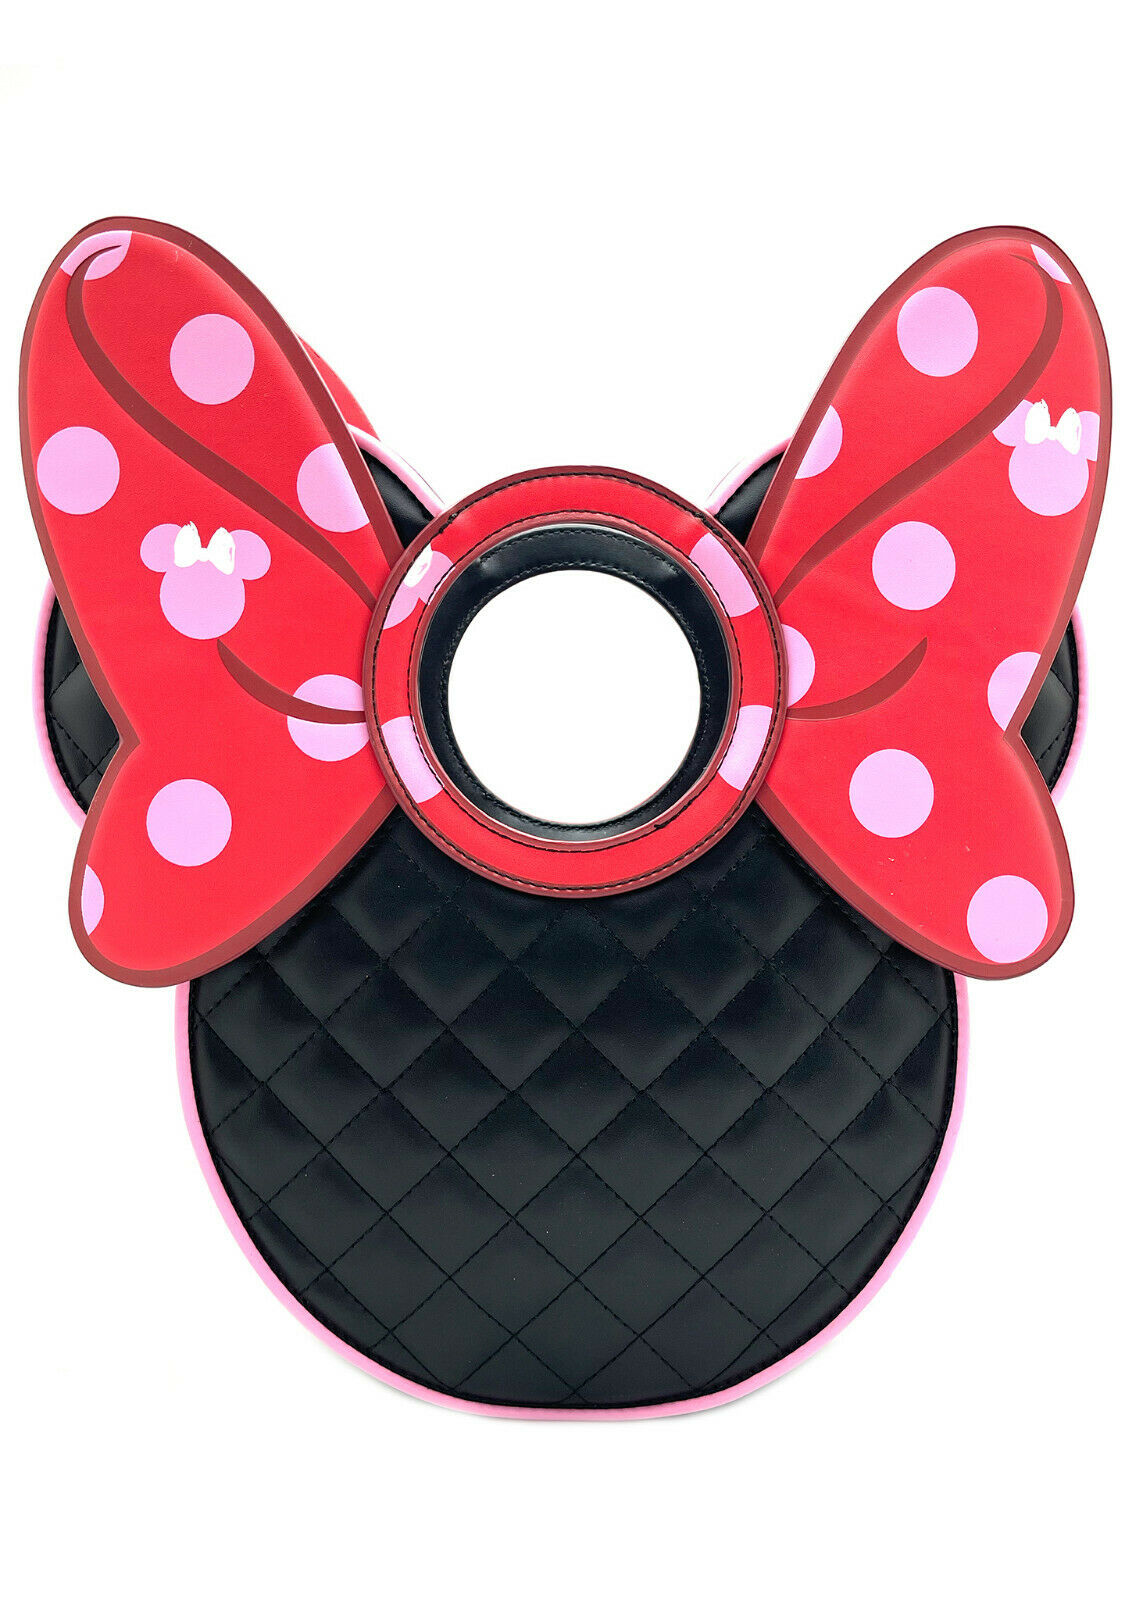 DISNEY MINNIE MOUSE QUILTED PINK POLKA DOT BOW HEAD CROSSBODY BAG